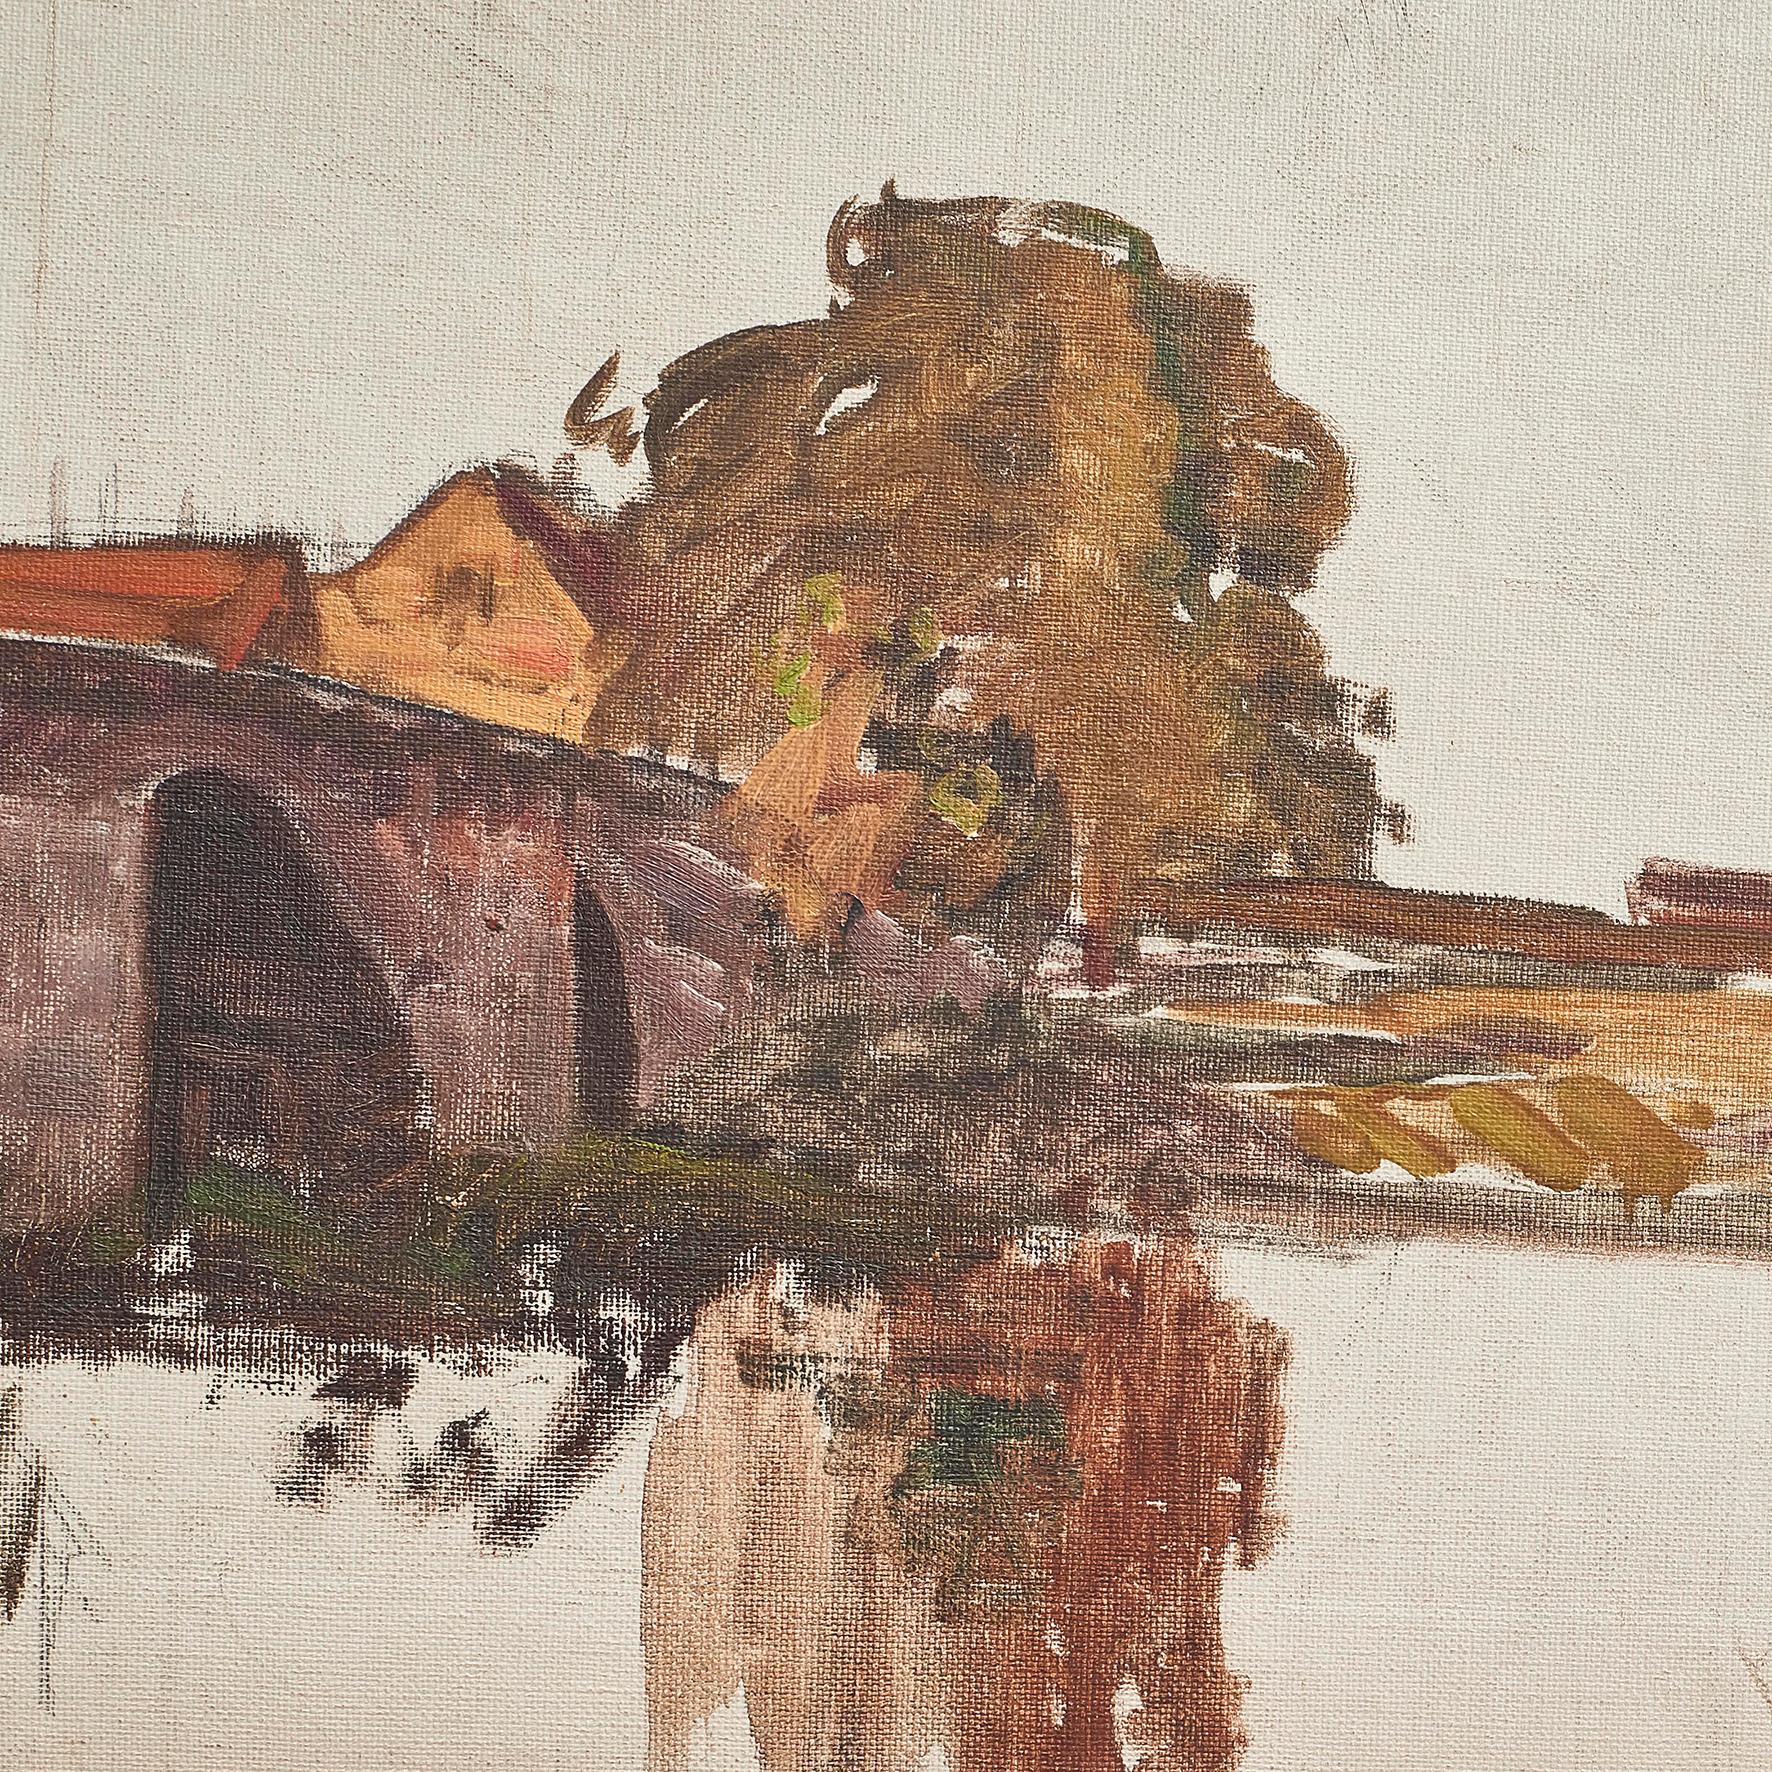 Other Albert Gottschalk, Sketch / Preliminary Drawing of Bridge over a River For Sale